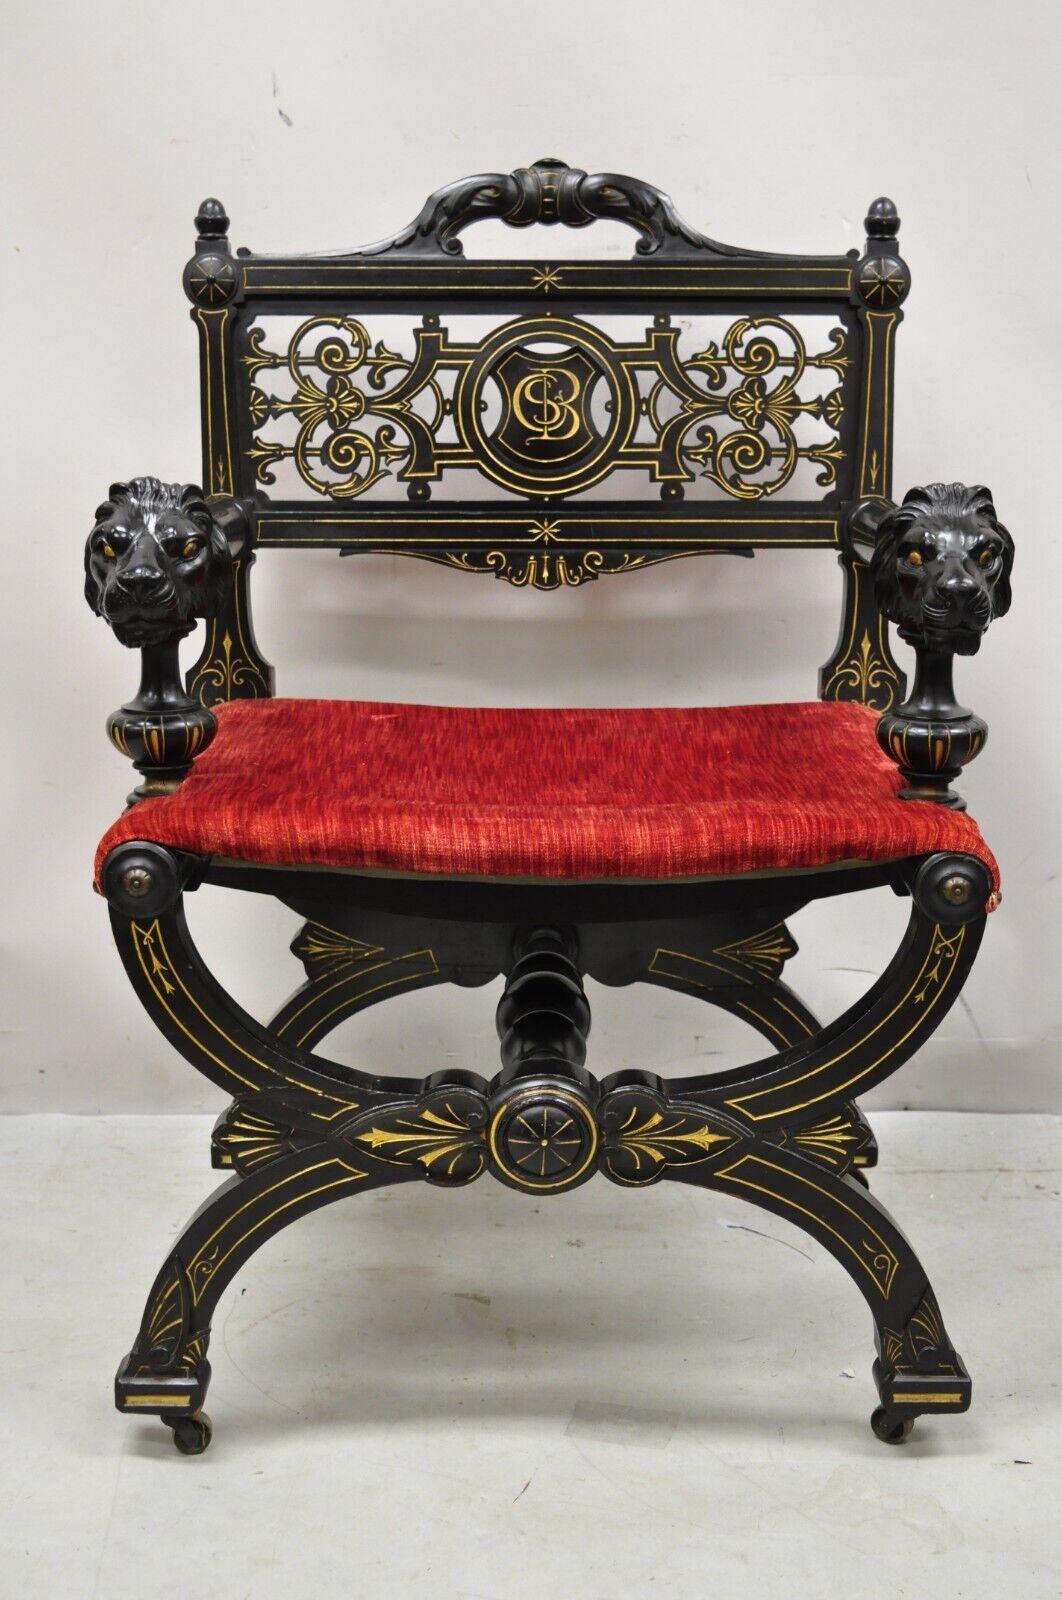 Antique Victorian Aesthetic movement ebonized curule throne arm chair with lions. Item features Lion carved armrests, black/ebonized finish, gold gilt accents, rolling casters, x-form curule frame, red upholstered seat. Very nice antique item.